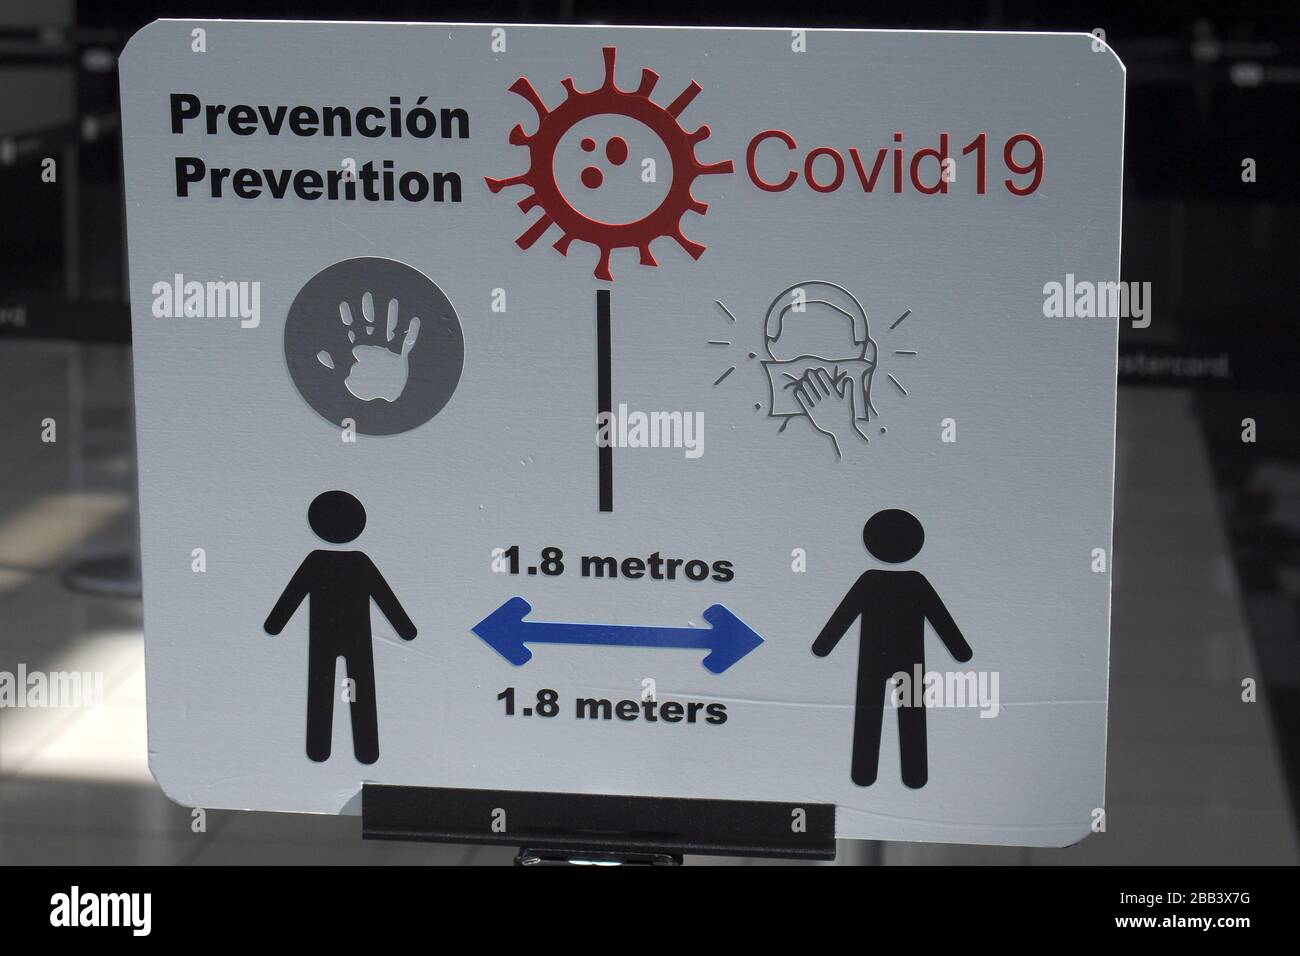 COVID19 - SOCIAL DISTANCING - STAY 1.8 METRES APART. SIGN IN SECURITY QUEUE AT SAN JOSE INTERNATIONAL AIRPORT, COSTA RICA. Stock Photo